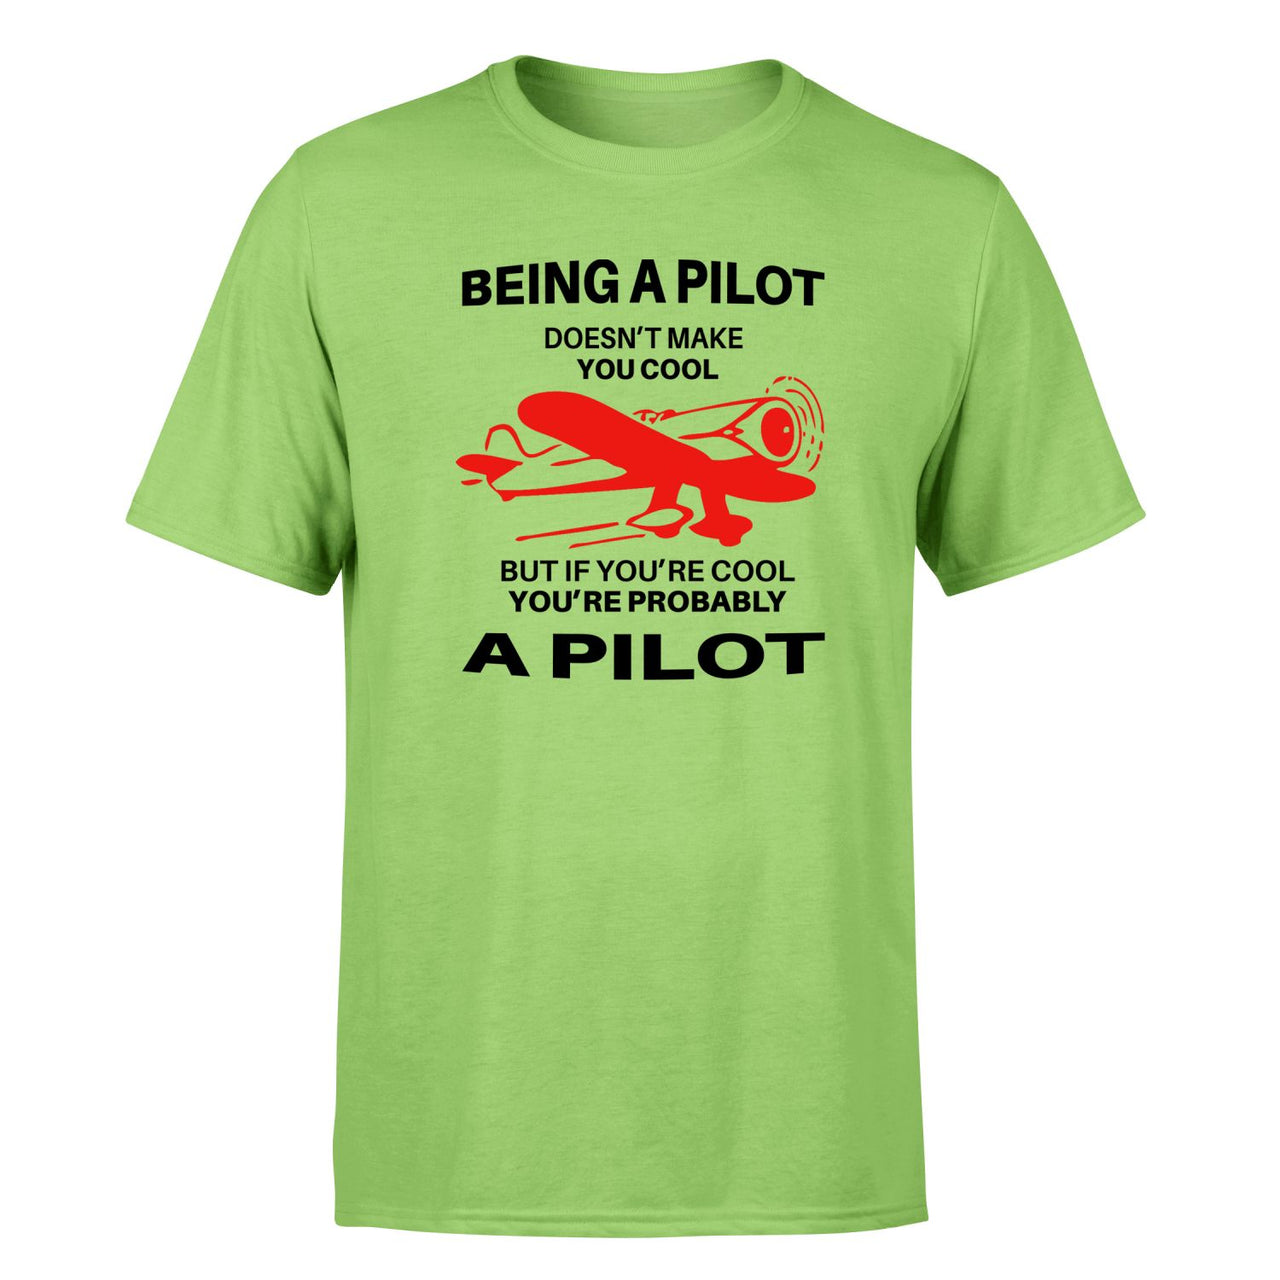 If You're Cool You're Probably a Pilot Designed T-Shirts